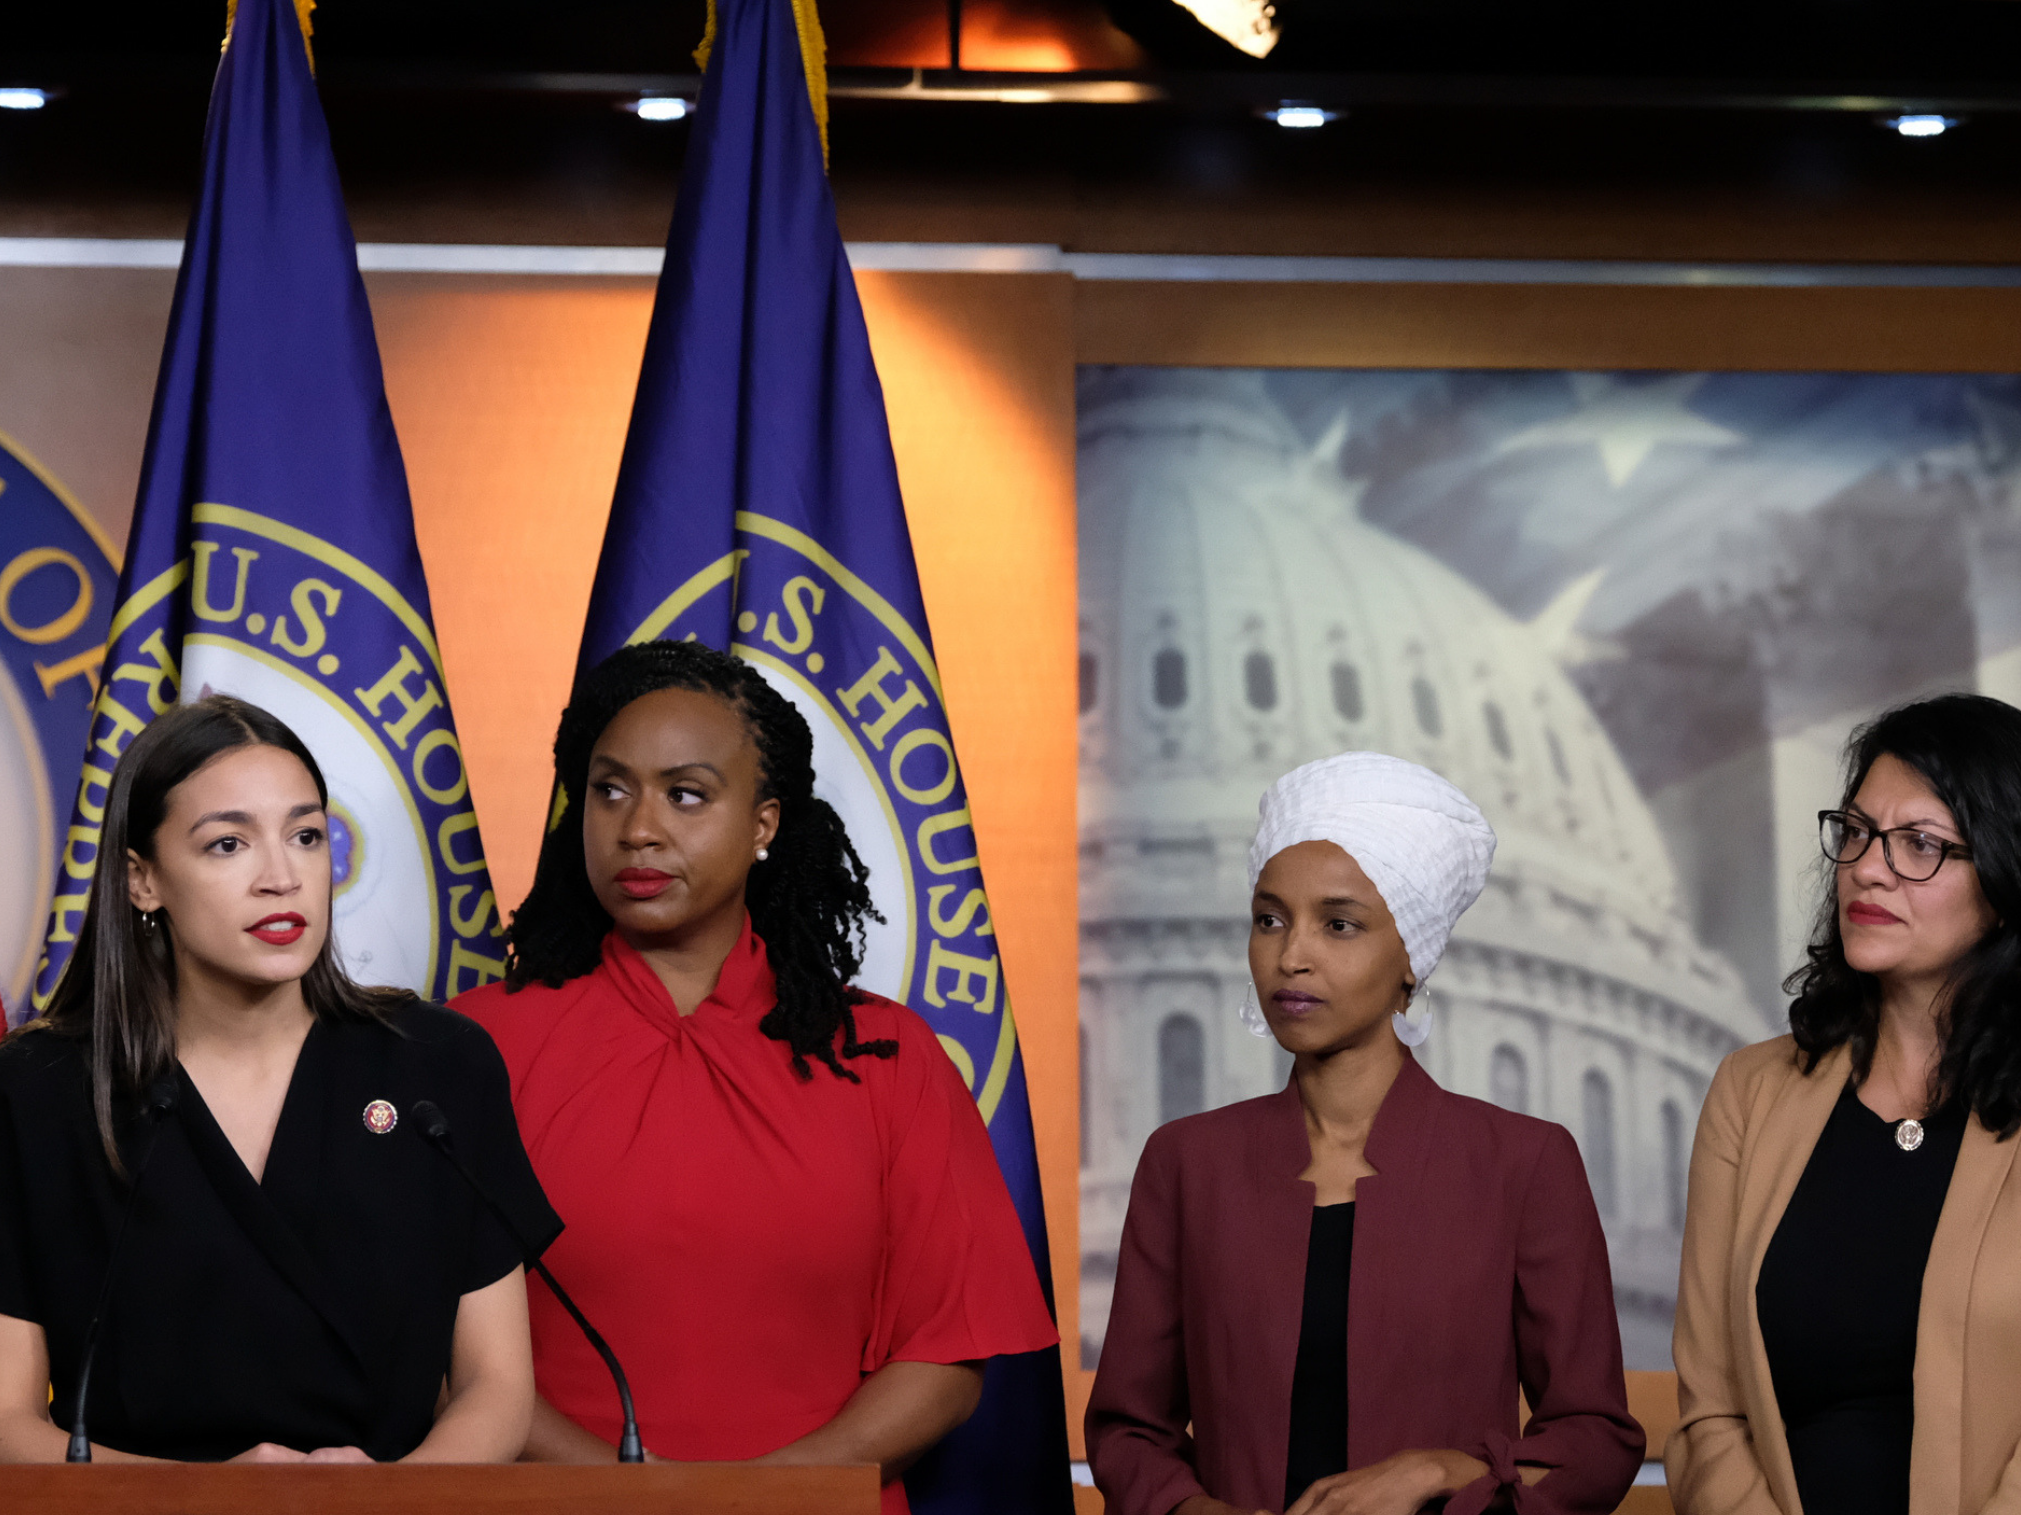 'The Squad' speaks out following US president's racist 'go home' tweet